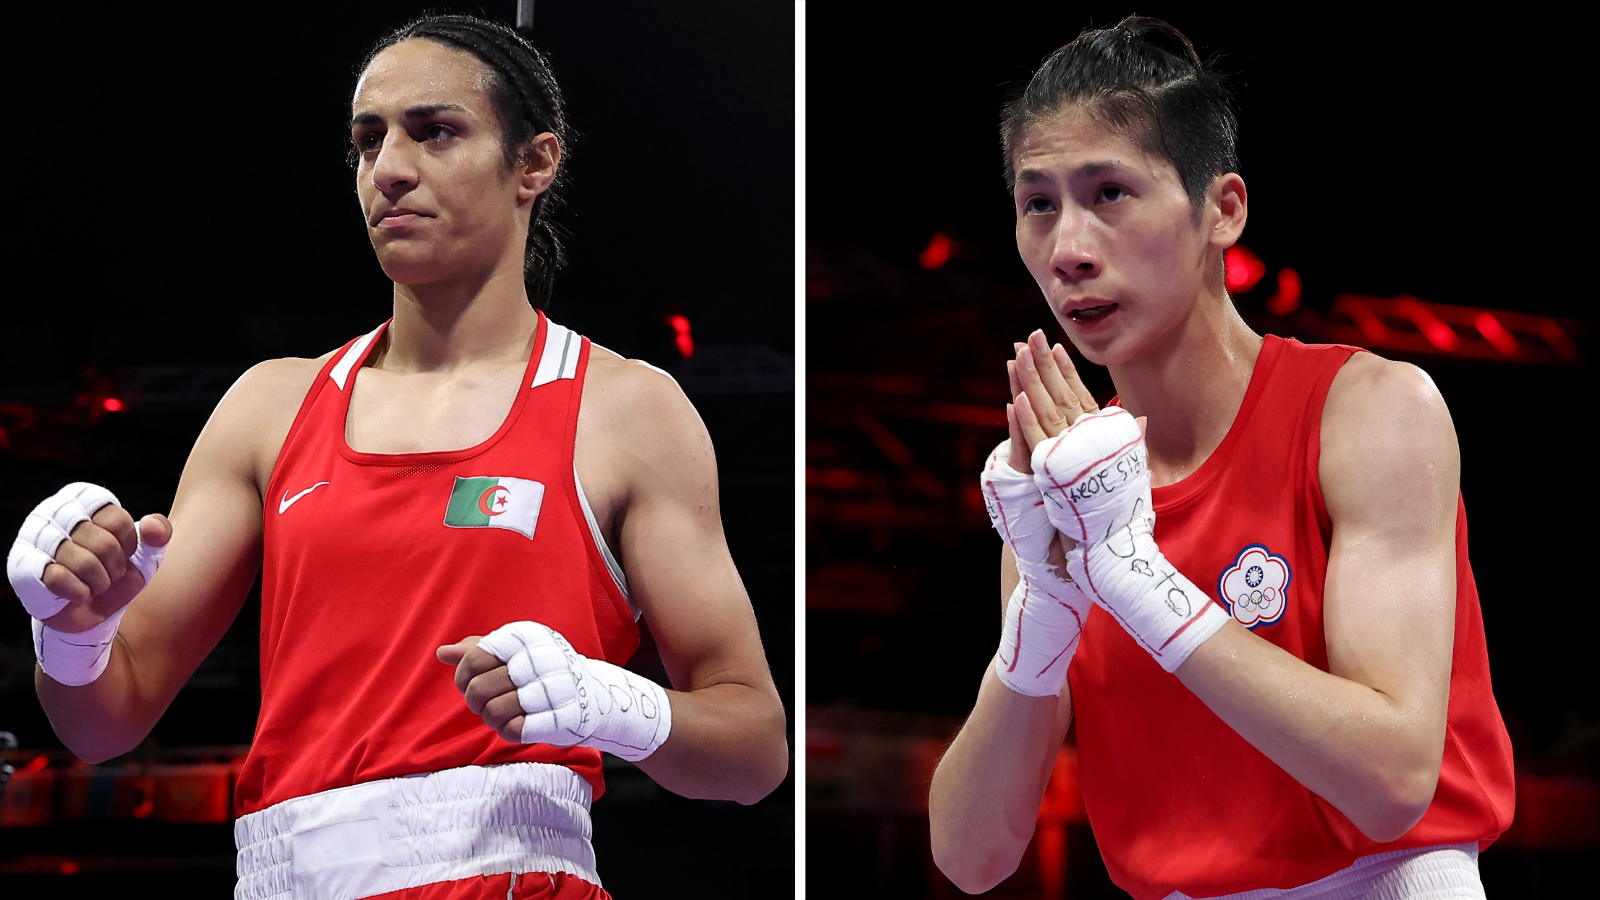 Bach defends Khelif and Lin competing in Olympics